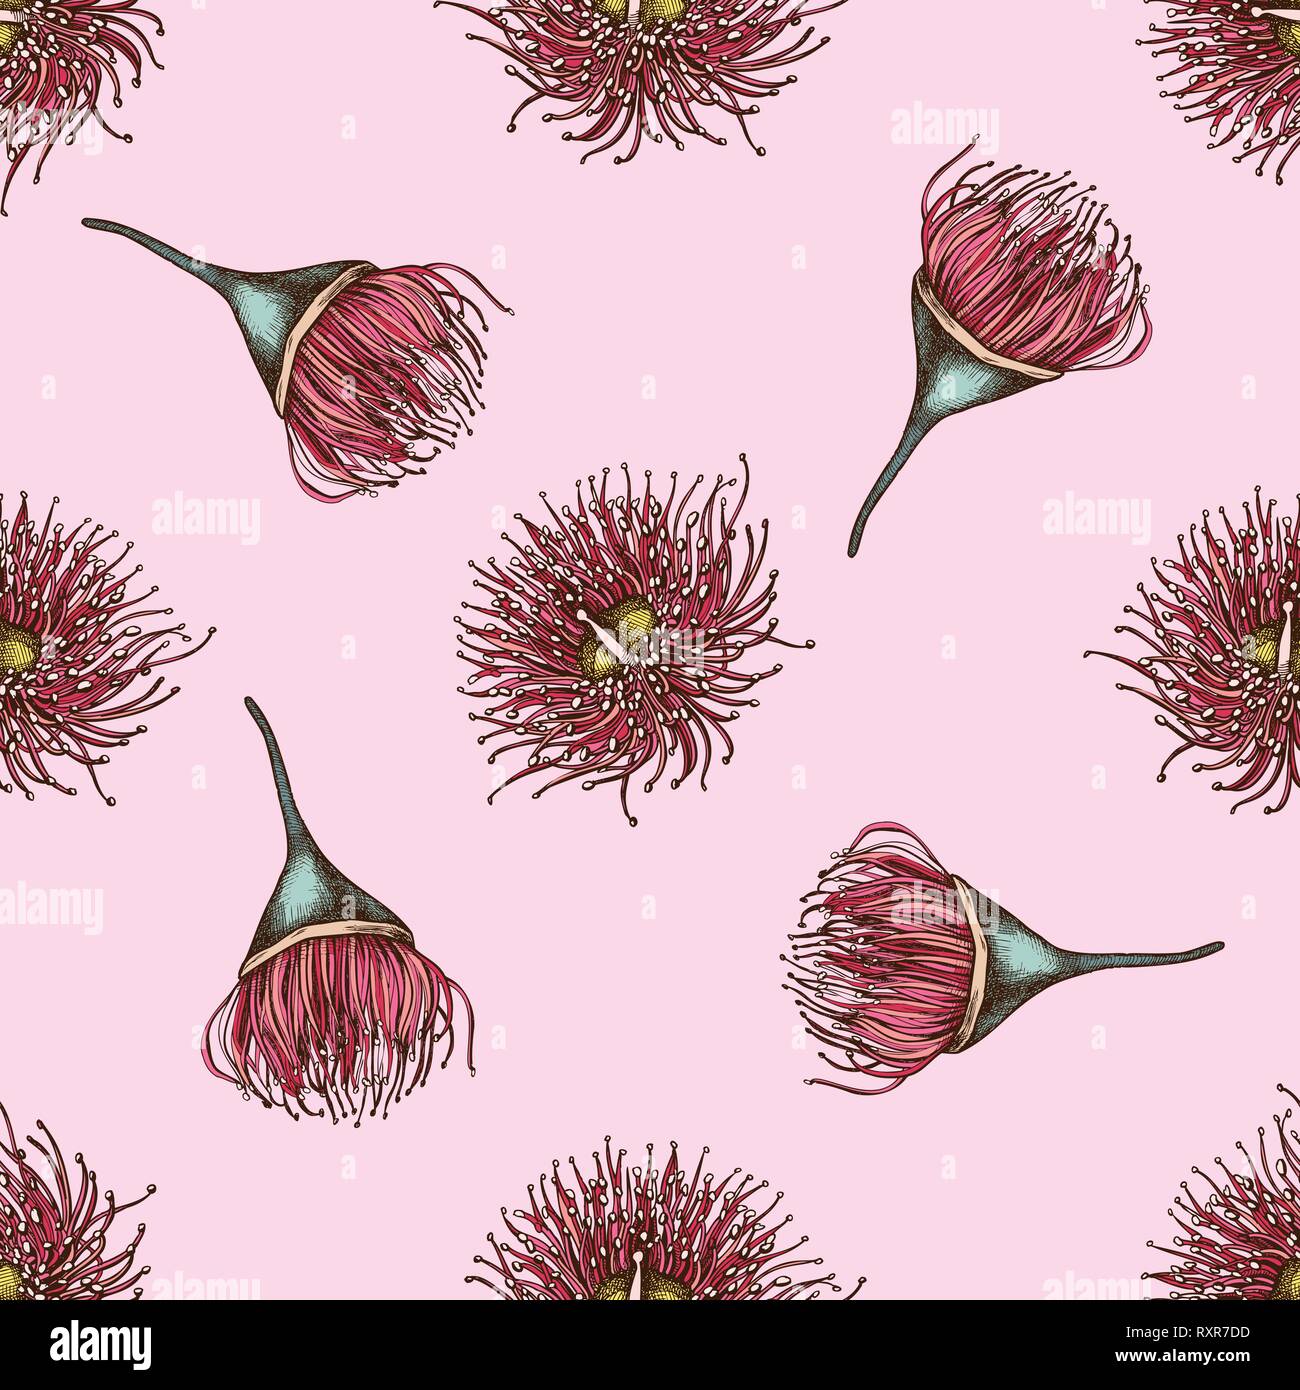 Seamless pattern with hand drawn colored eucalyptus flower stock illustration Stock Vector